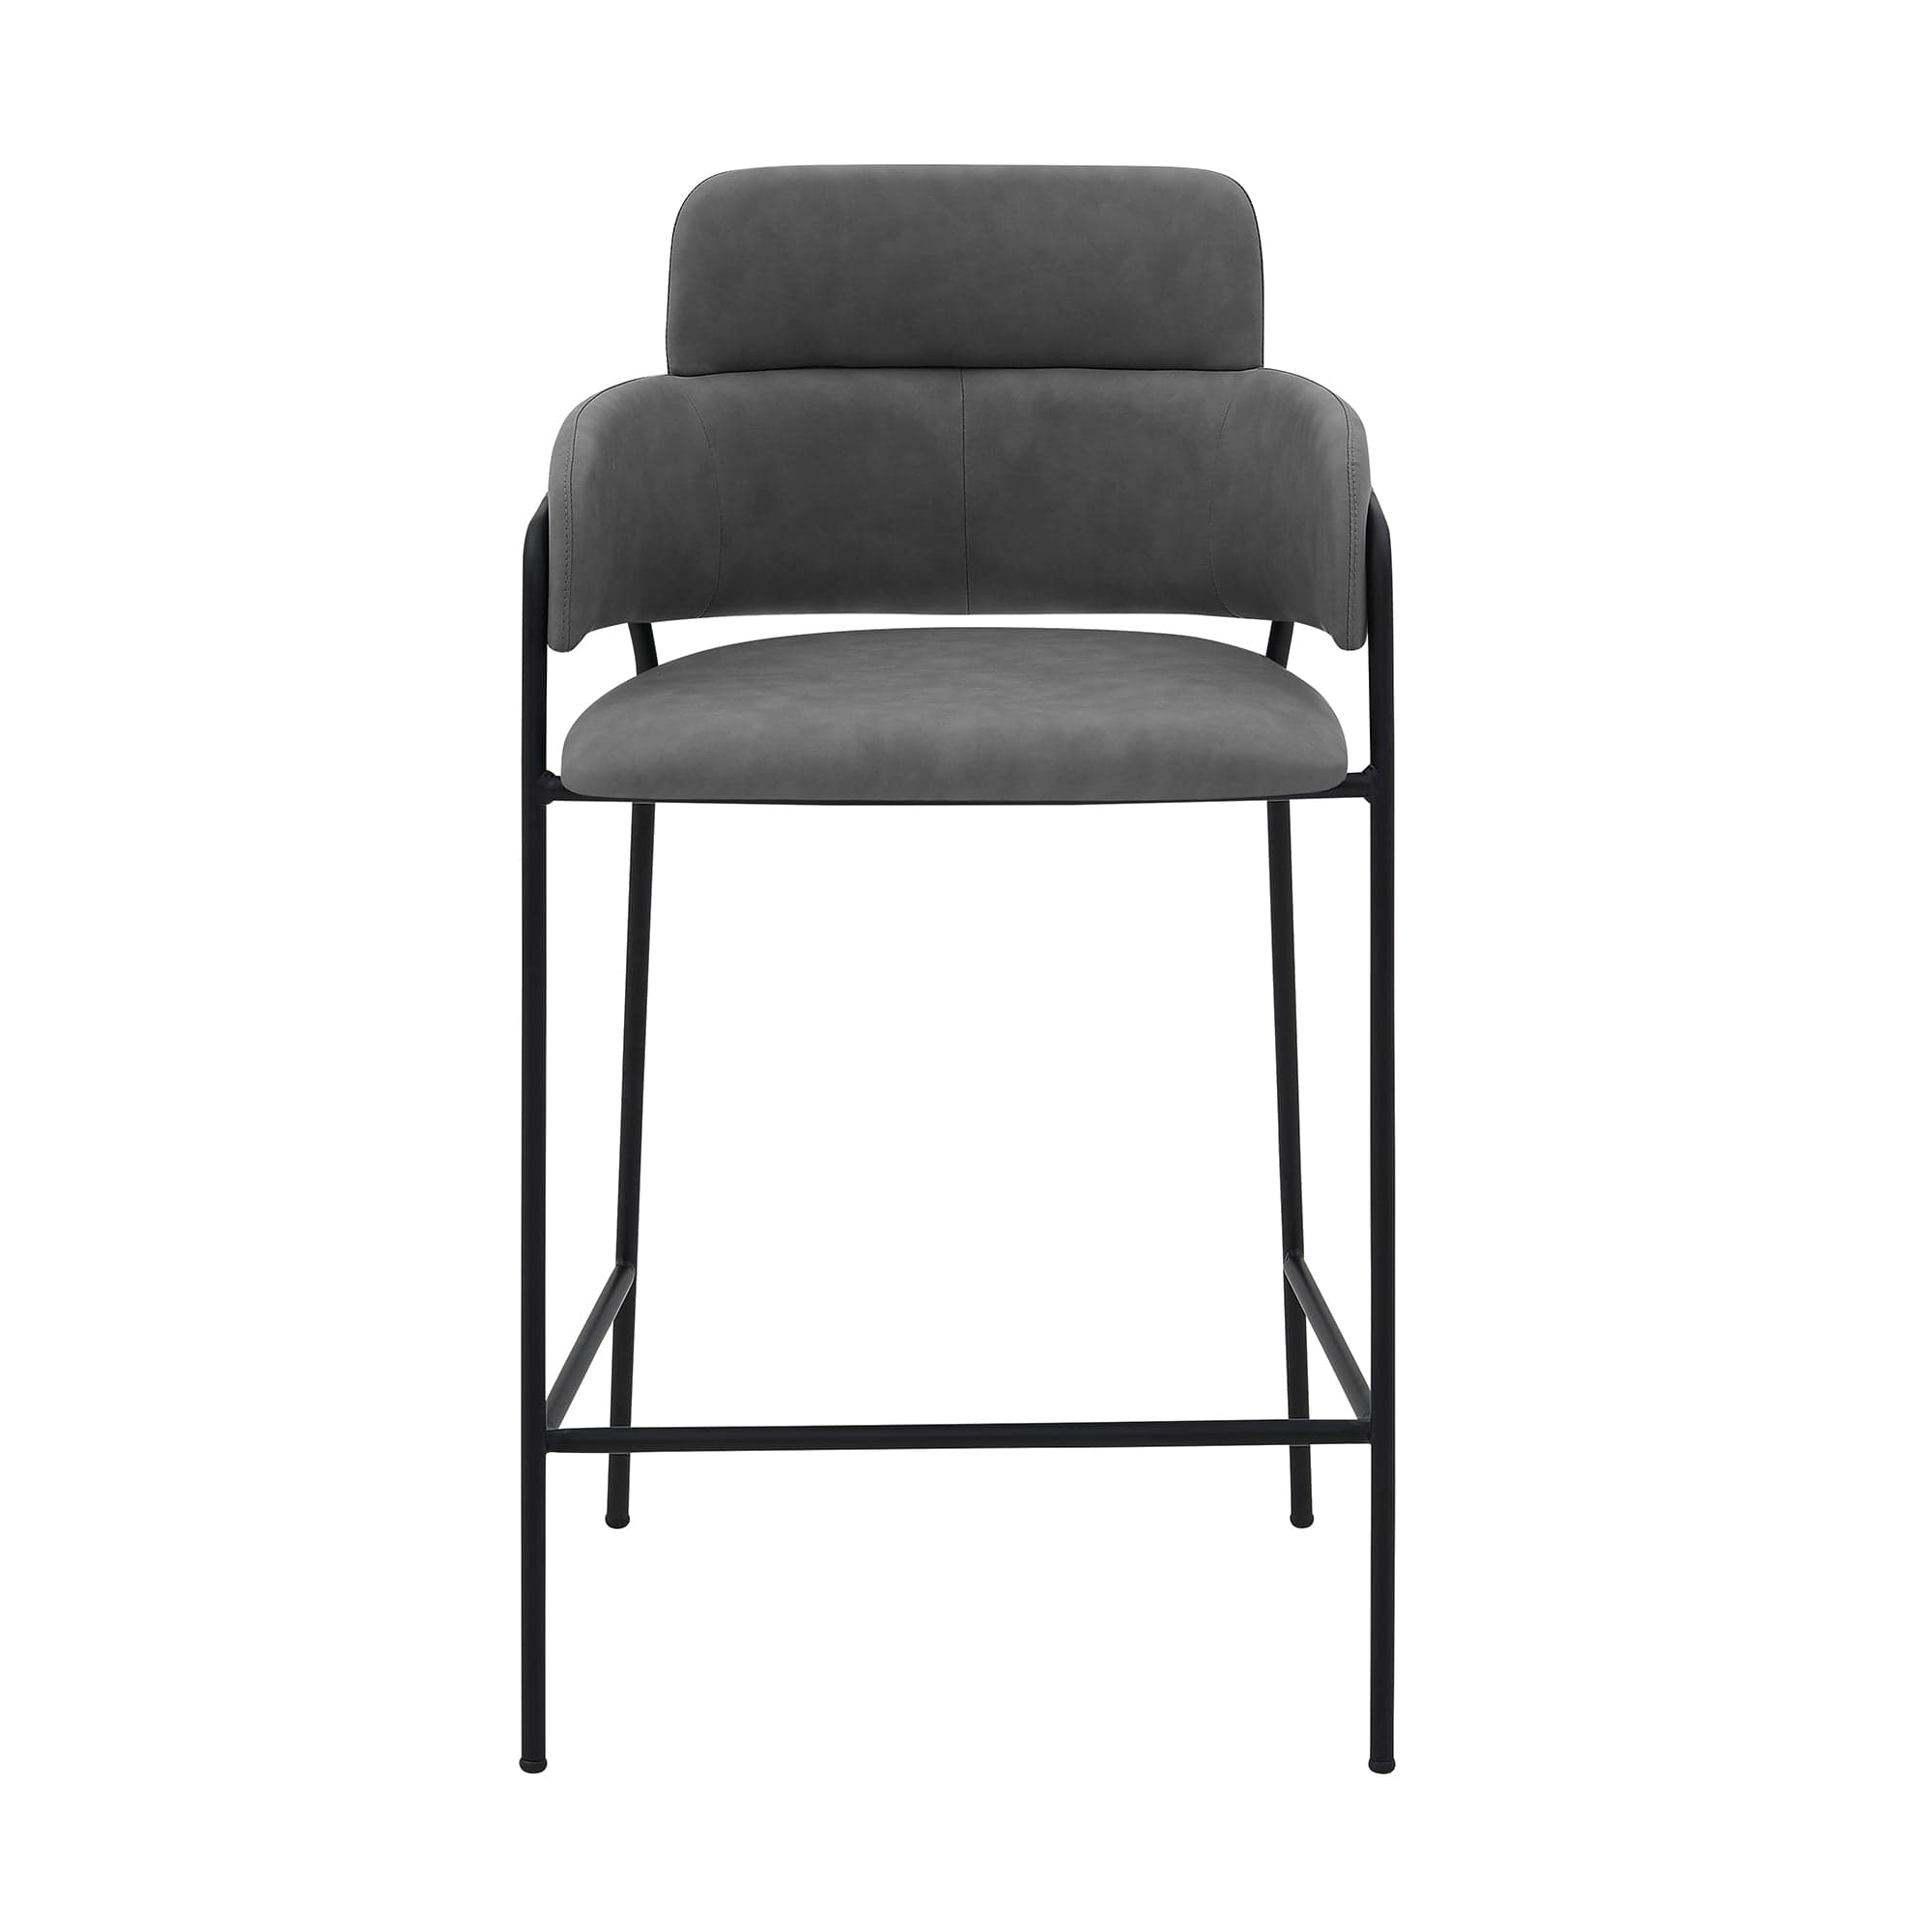 Armen Living Barstool Armen Living | Oshen 26" Gray Faux Leather and Metal Counter Height Bar Stool | LCOSBABLGRY26